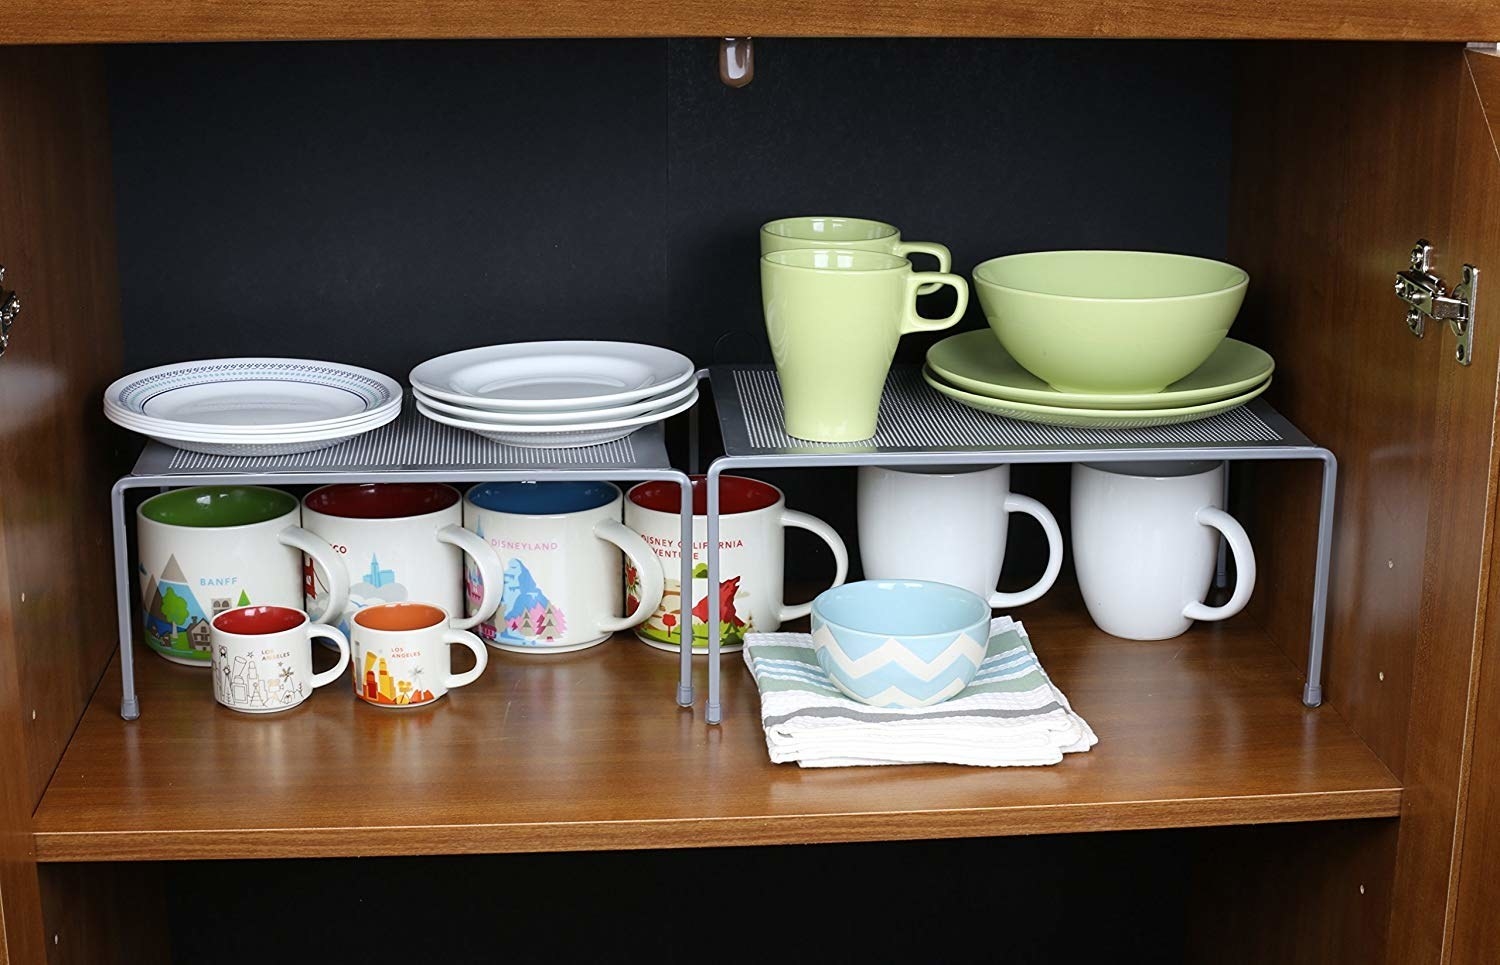 A silver expandable rack with mugs at the bottom and plates and cups at the top